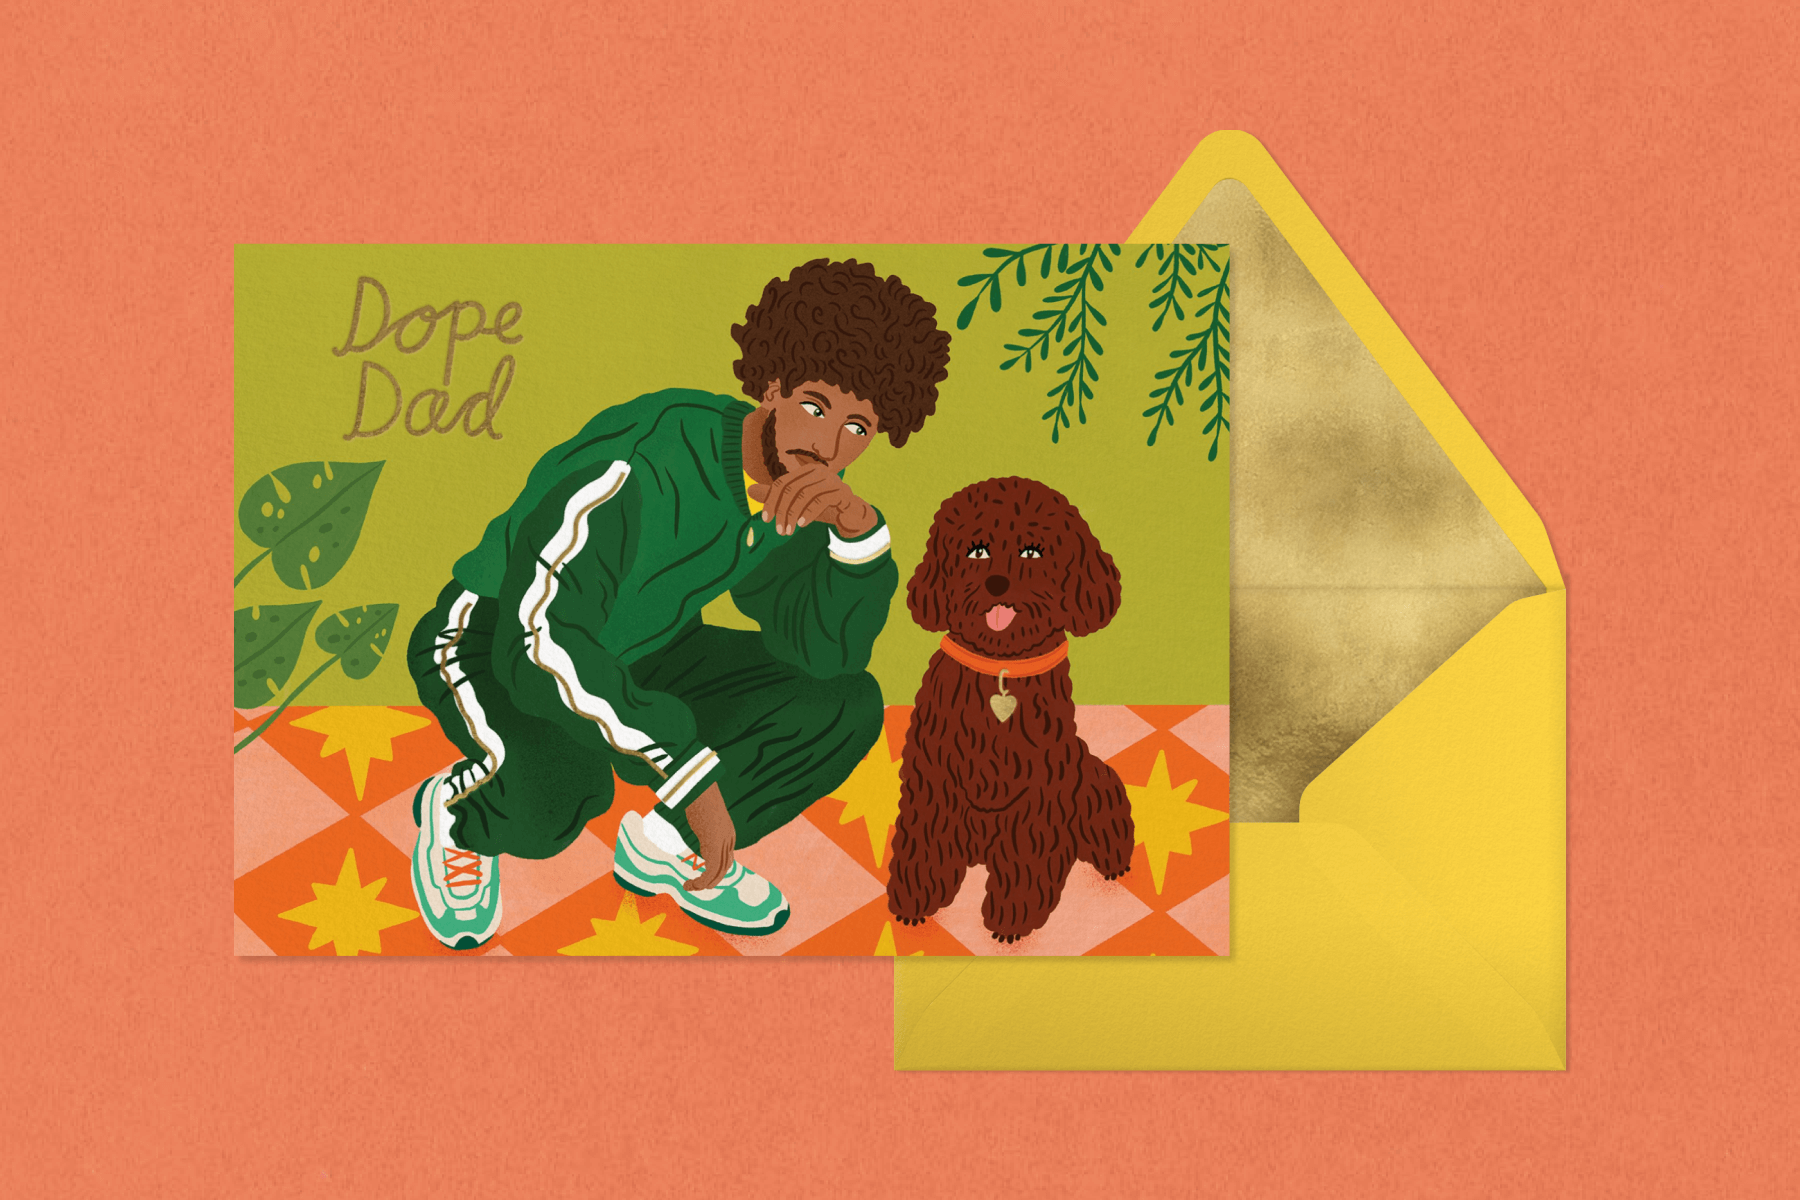 A card with a man in a green tracksuit leaning towards brown dog with the words DOPE DAD in script next to a yellow envelope.